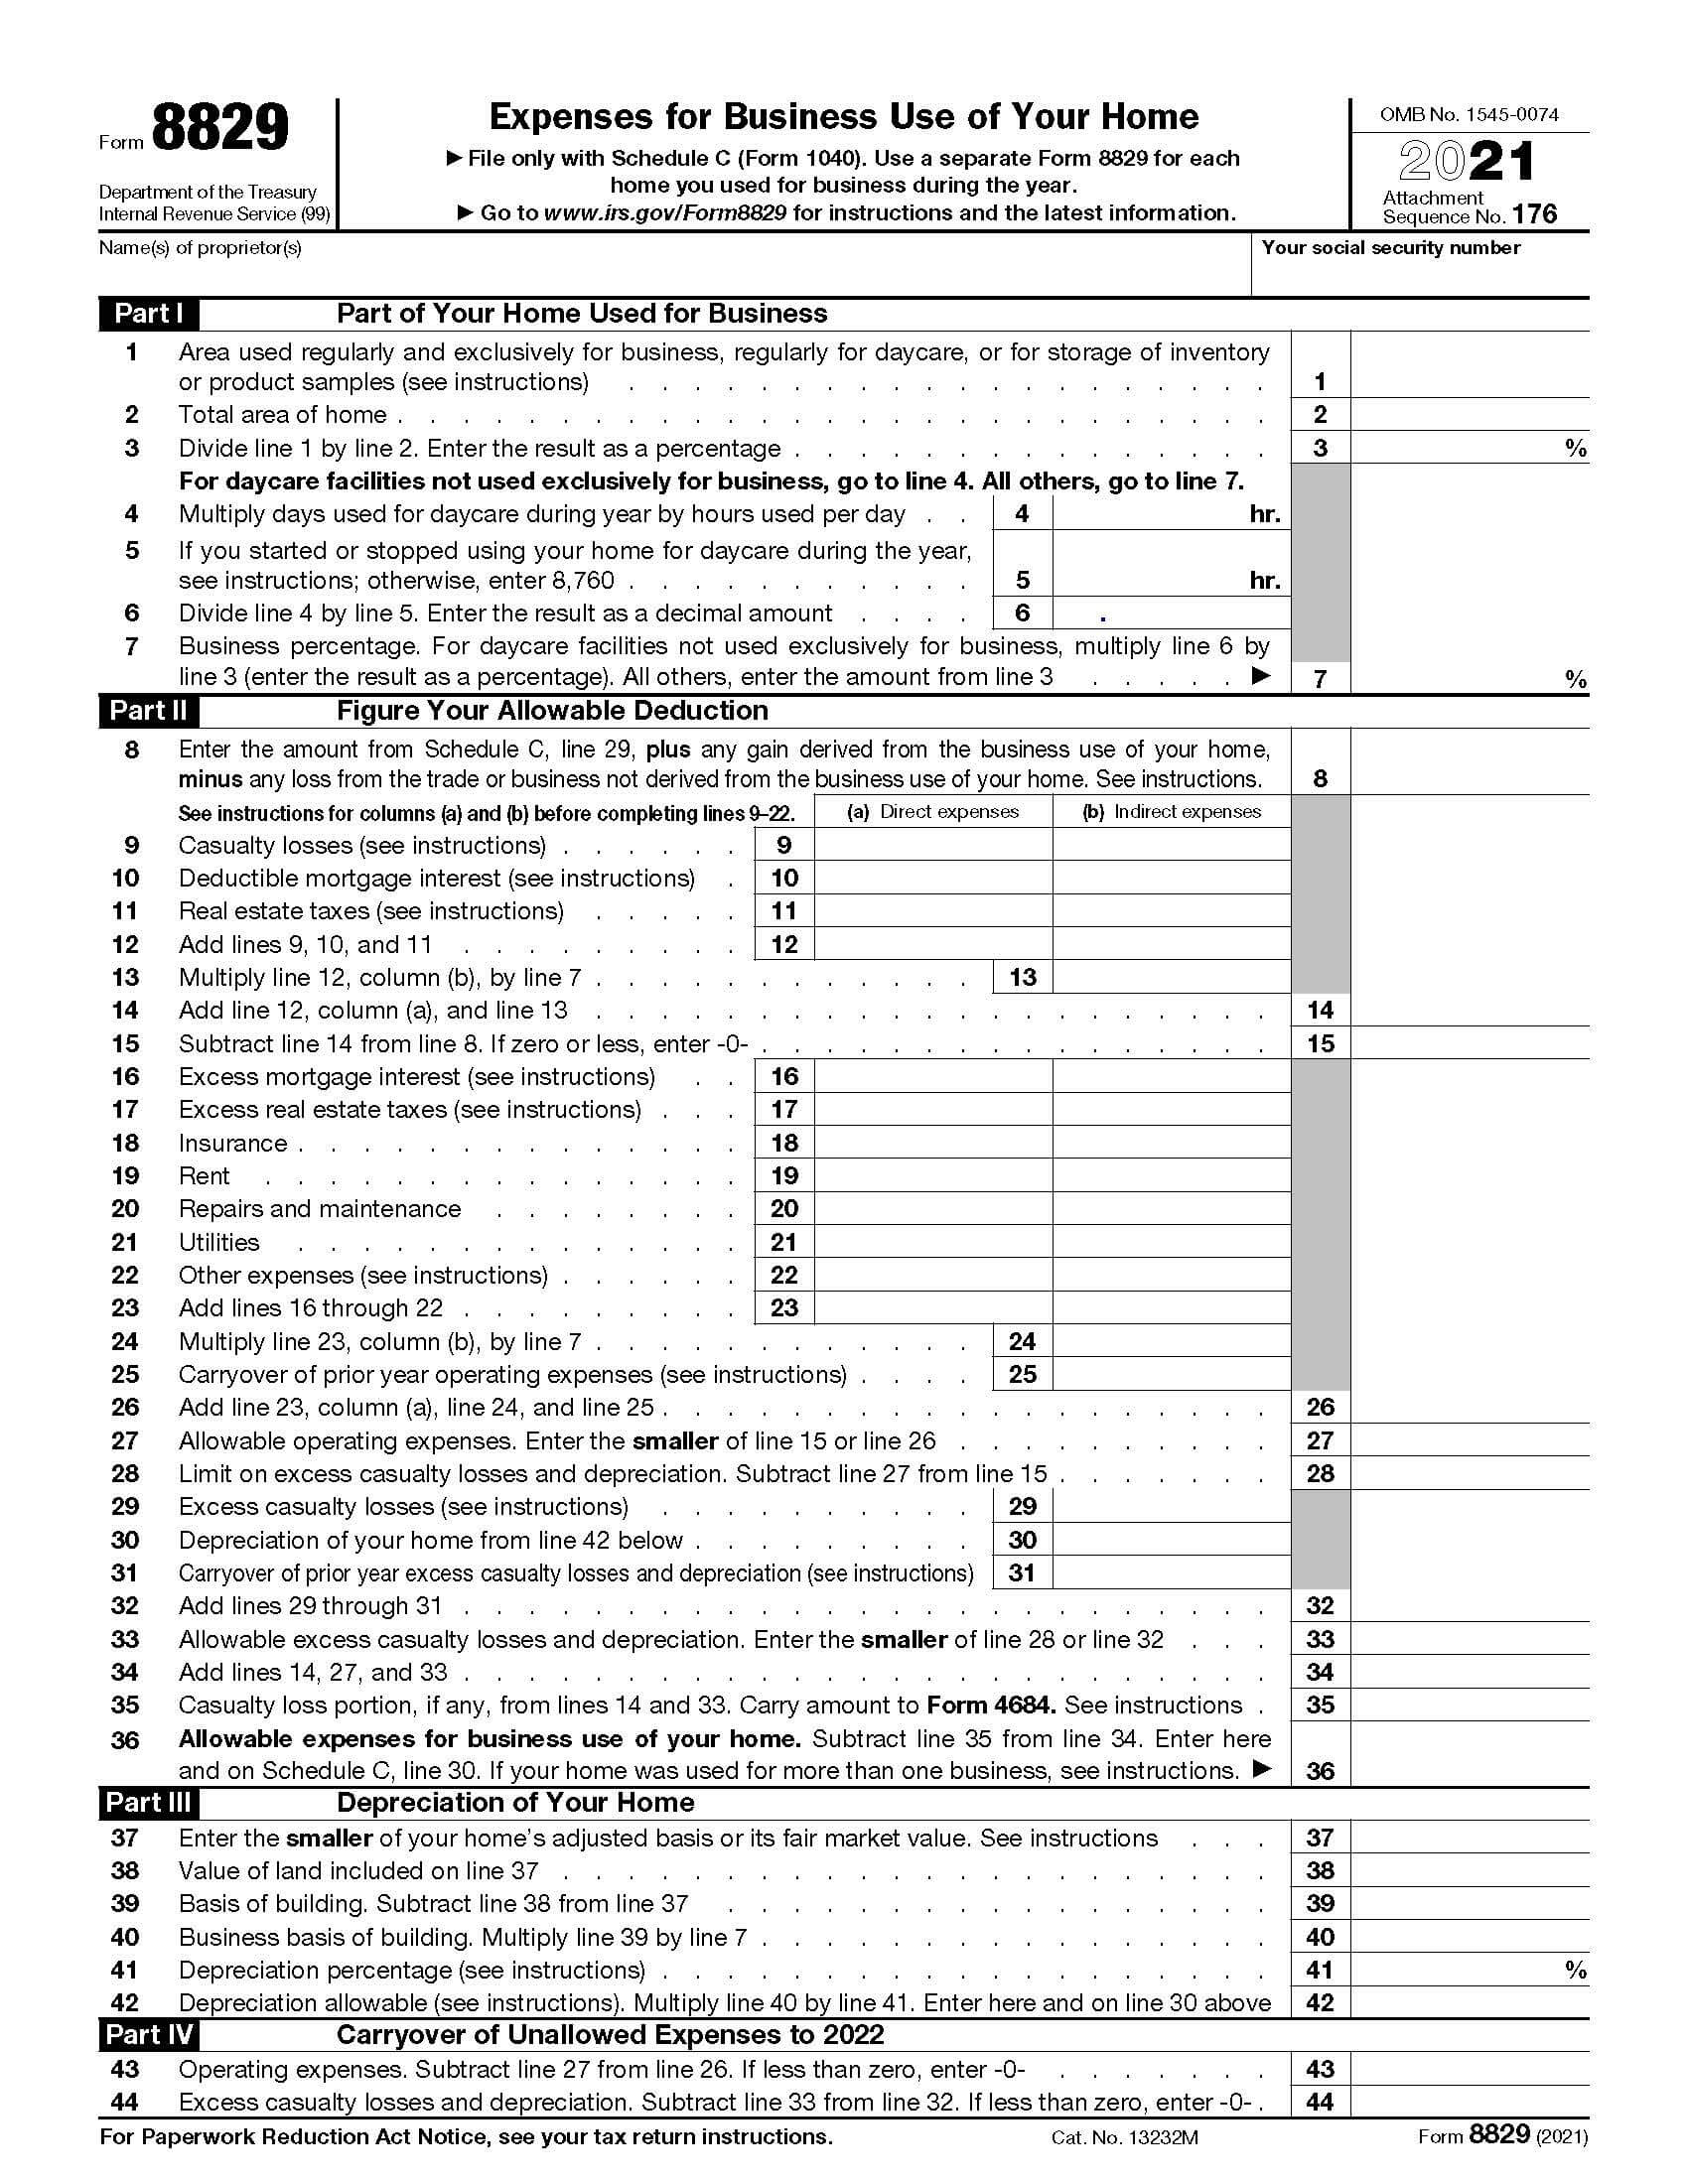 irs form-8829 example